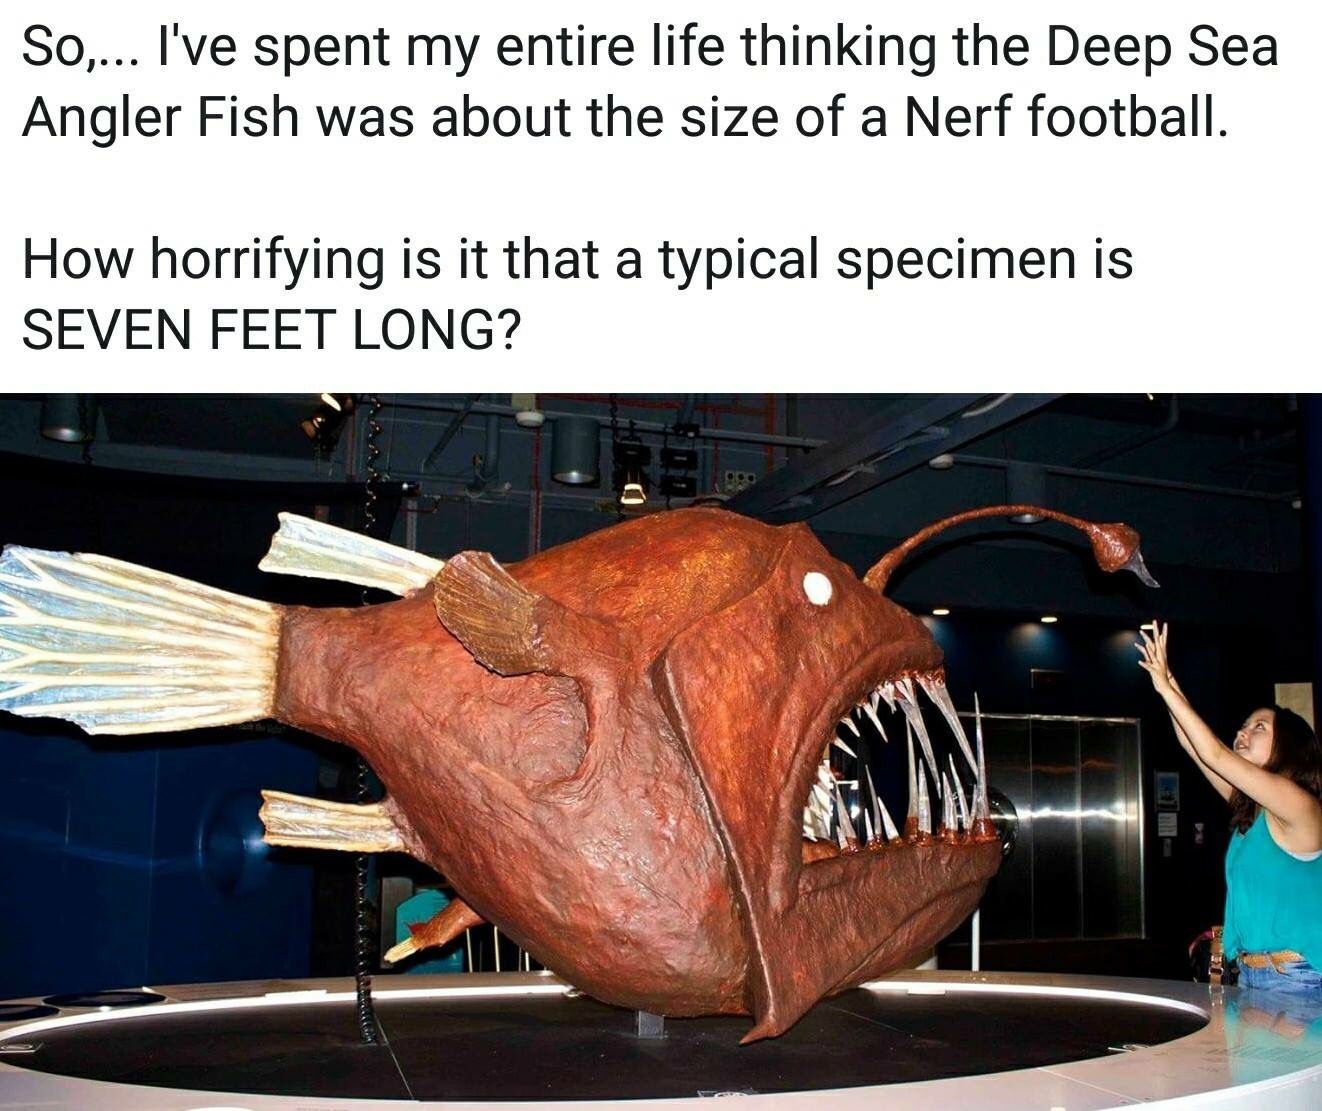 actual size of anglerfish - So... I've spent my entire life thinking the Deep Sea Angler Fish was about the size of a Nerf football. How horrifying is it that a typical specimen is Seven Feet Long?